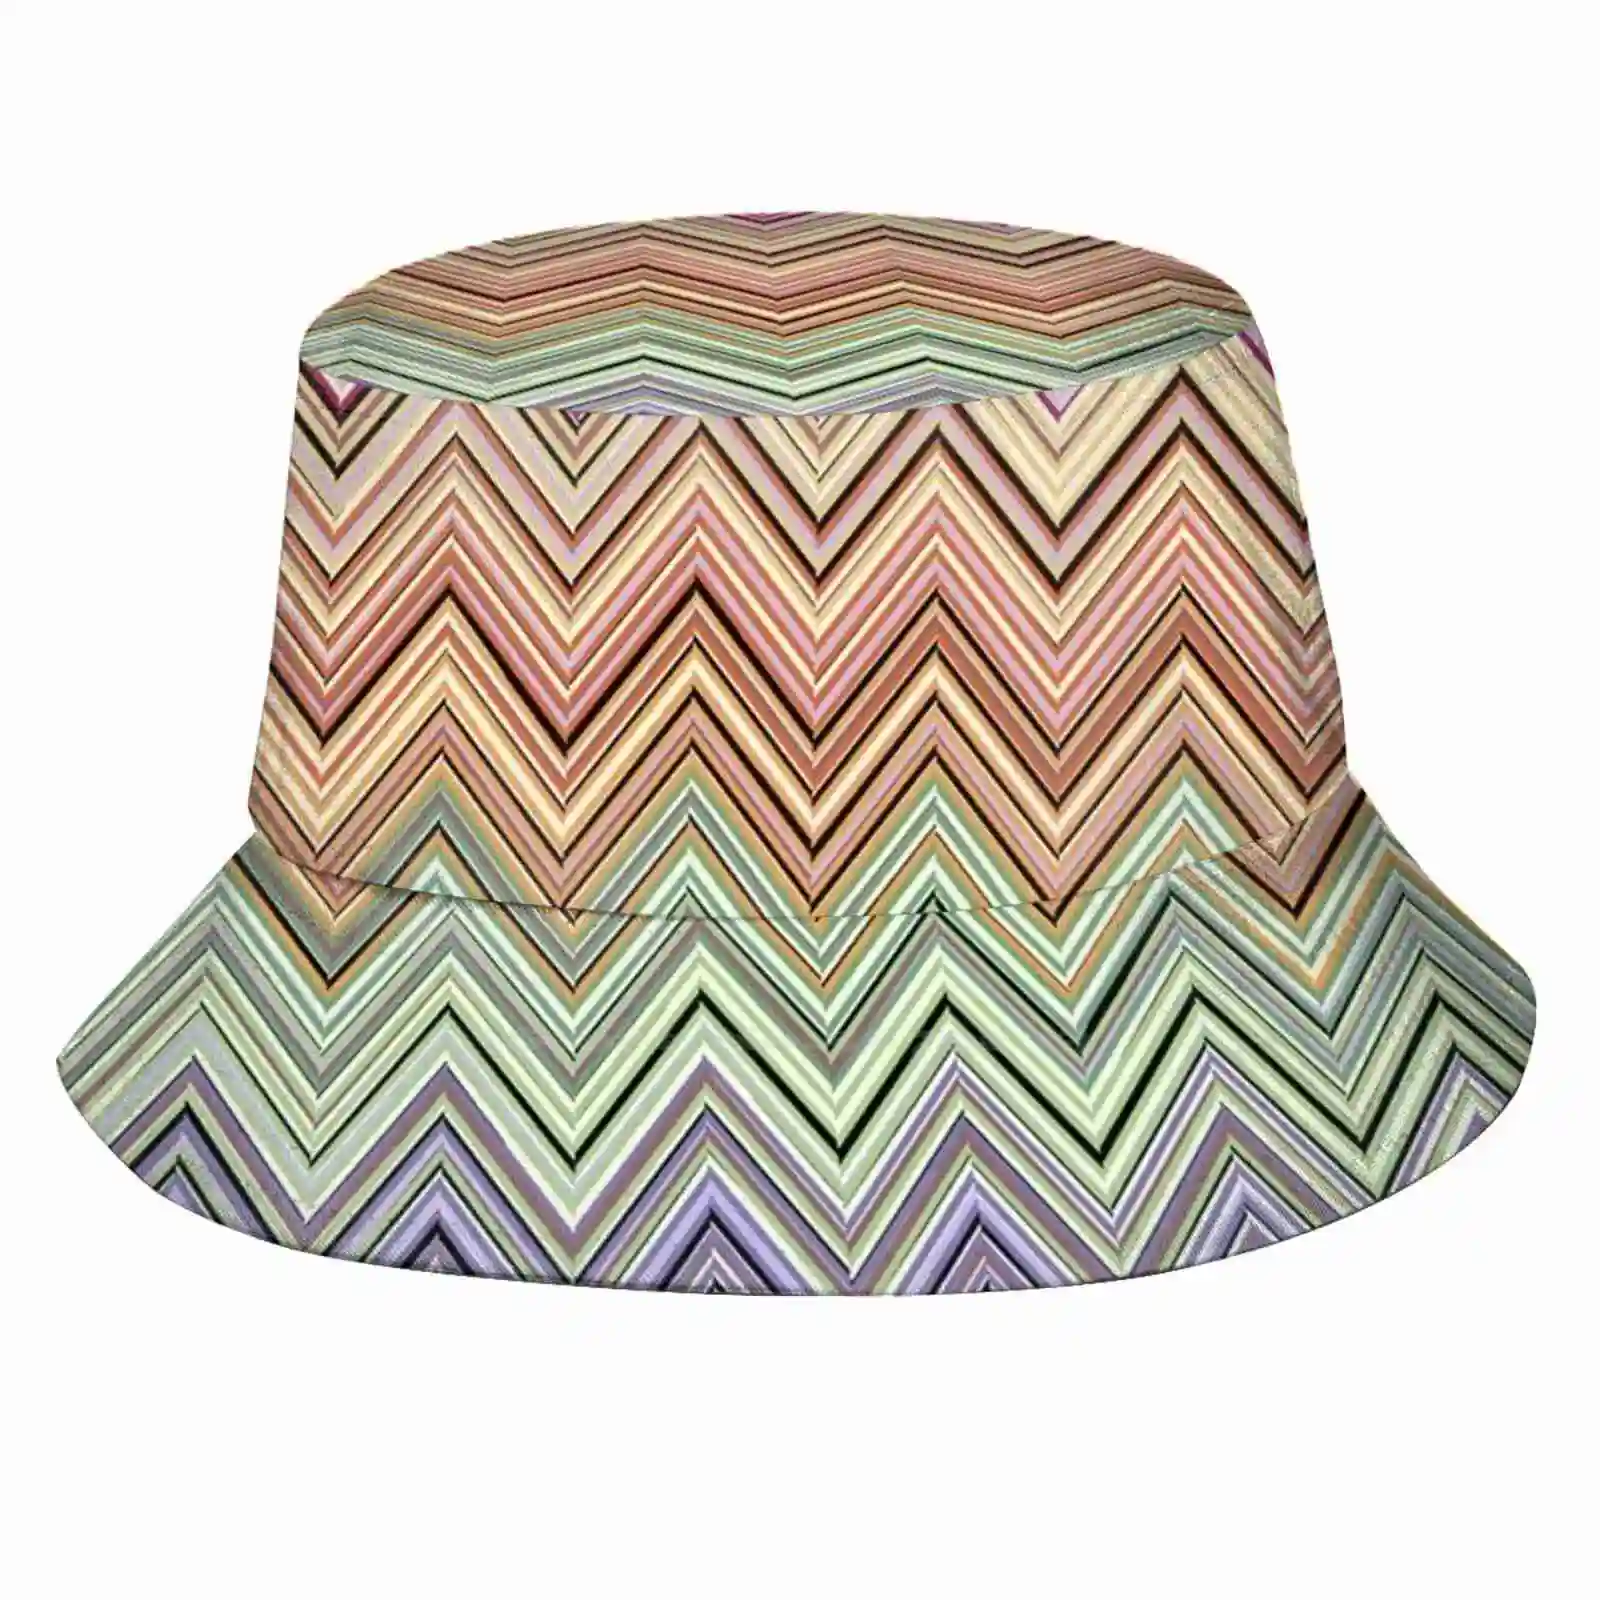 Home Decor Causal Cap Buckets Hat Geometric Fashion Home Pastel Contemporary Expensive Modern Boho Influencer Textile Color